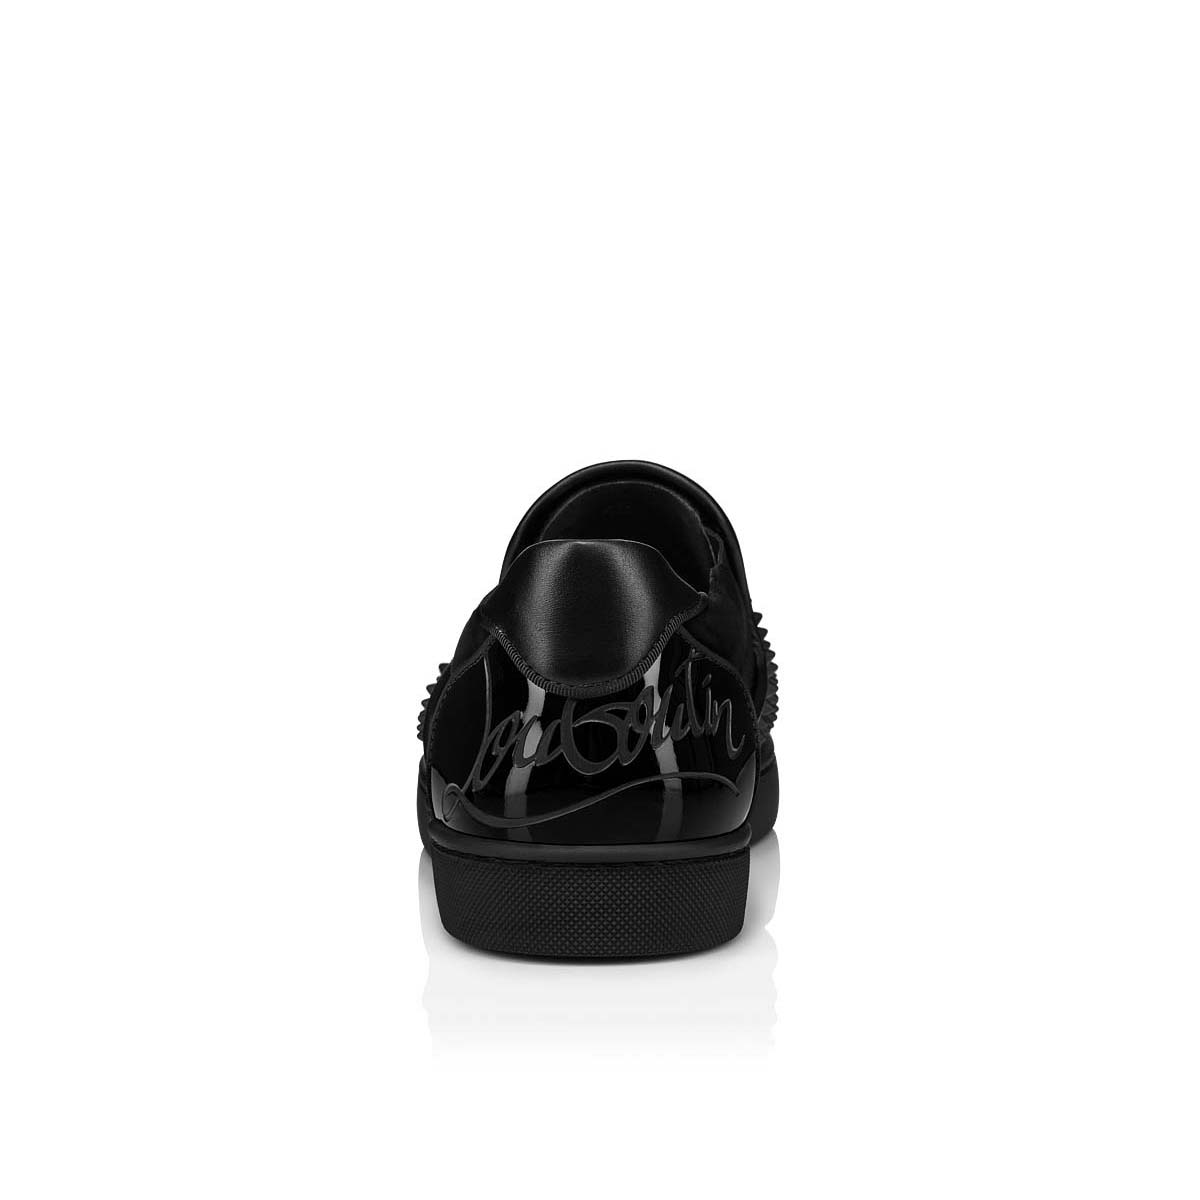 Fun Sailor Boat Spikes - Sneakers - Calf leather - Black 